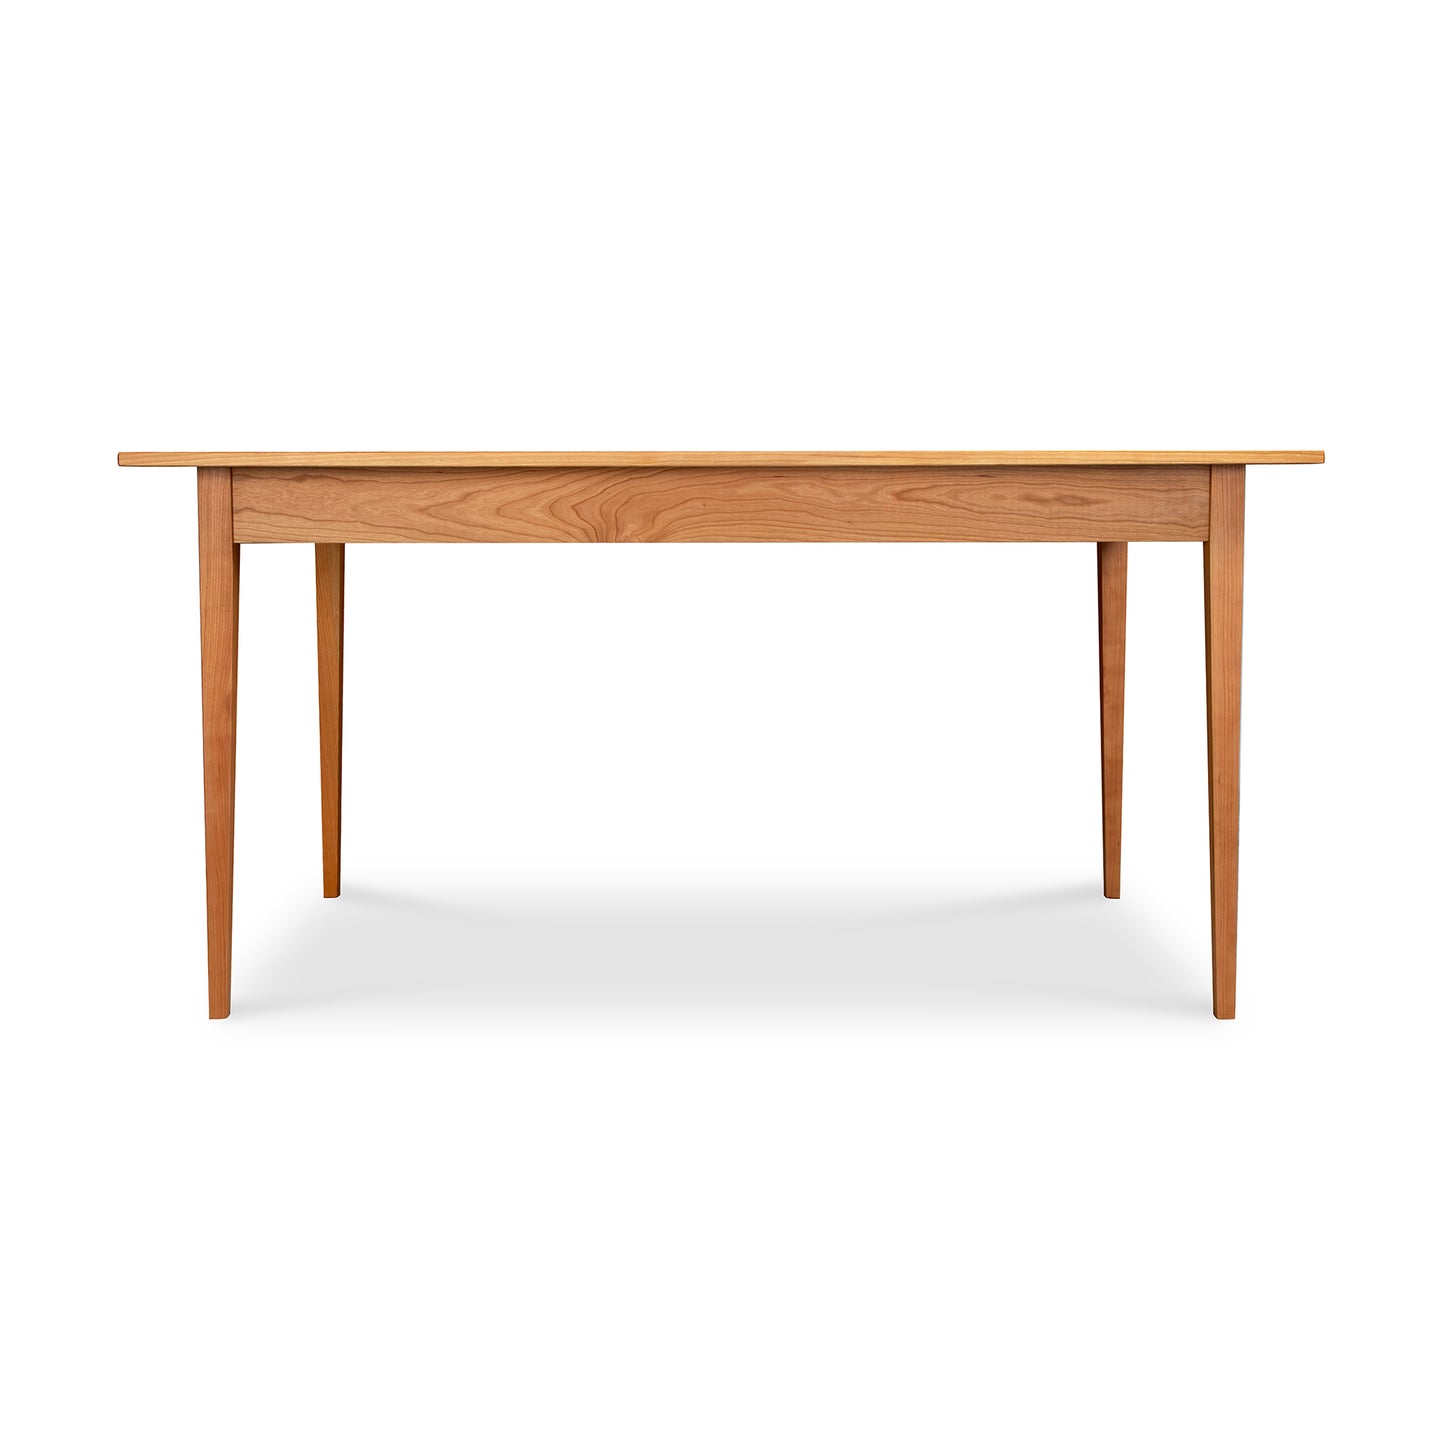 A Country Shaker Dining Table with a solid natural wood top on a white background by Vermont Woods Studios.